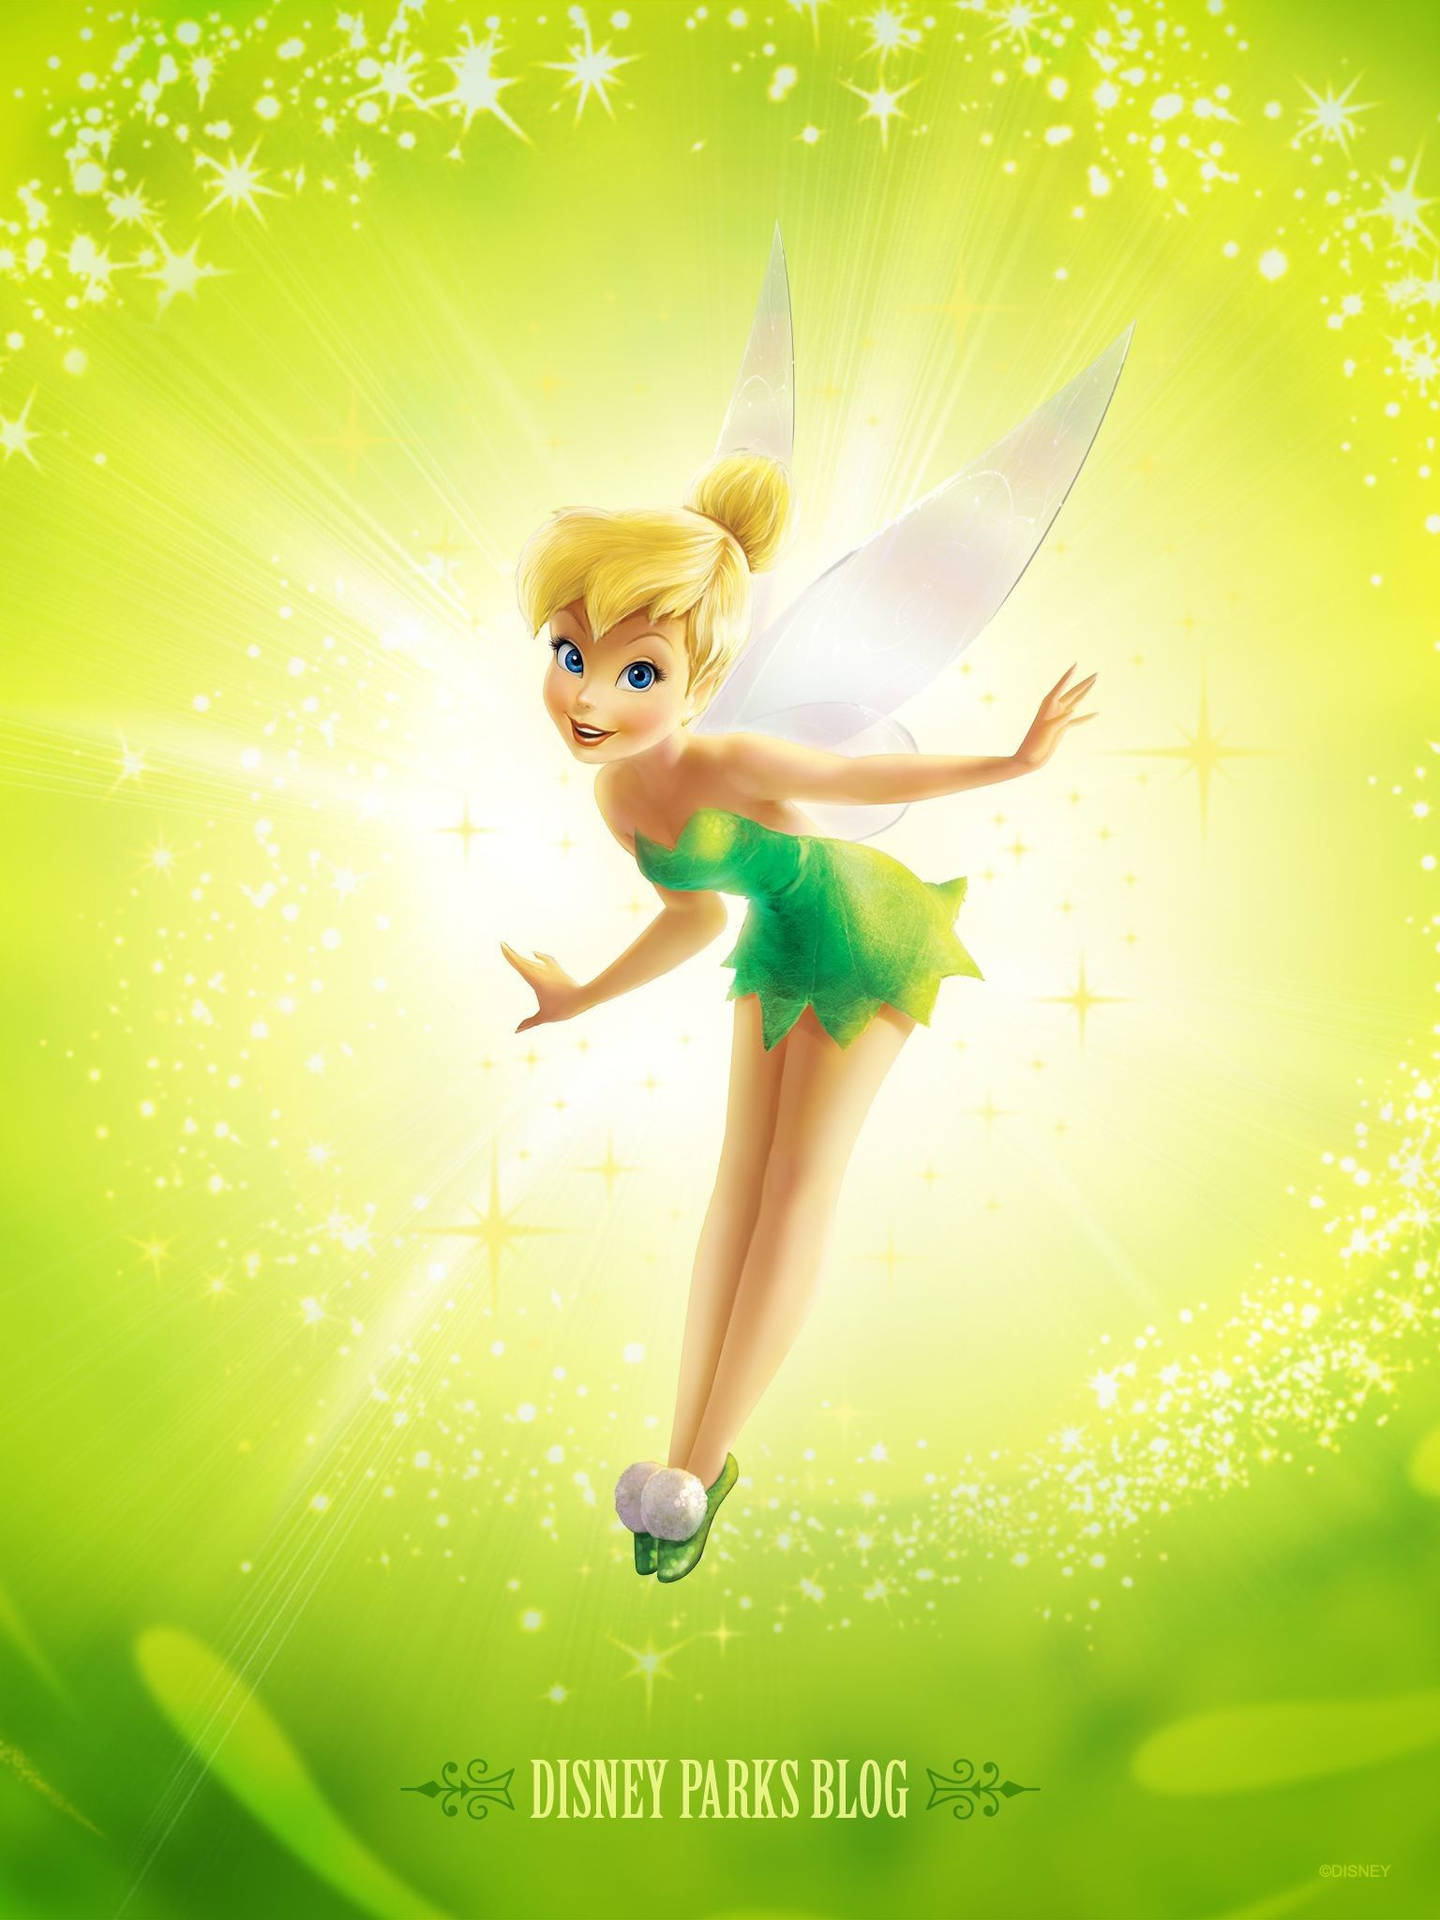 Free Tinkerbell Wallpaper Downloads, [100+] Tinkerbell Wallpapers for FREE  